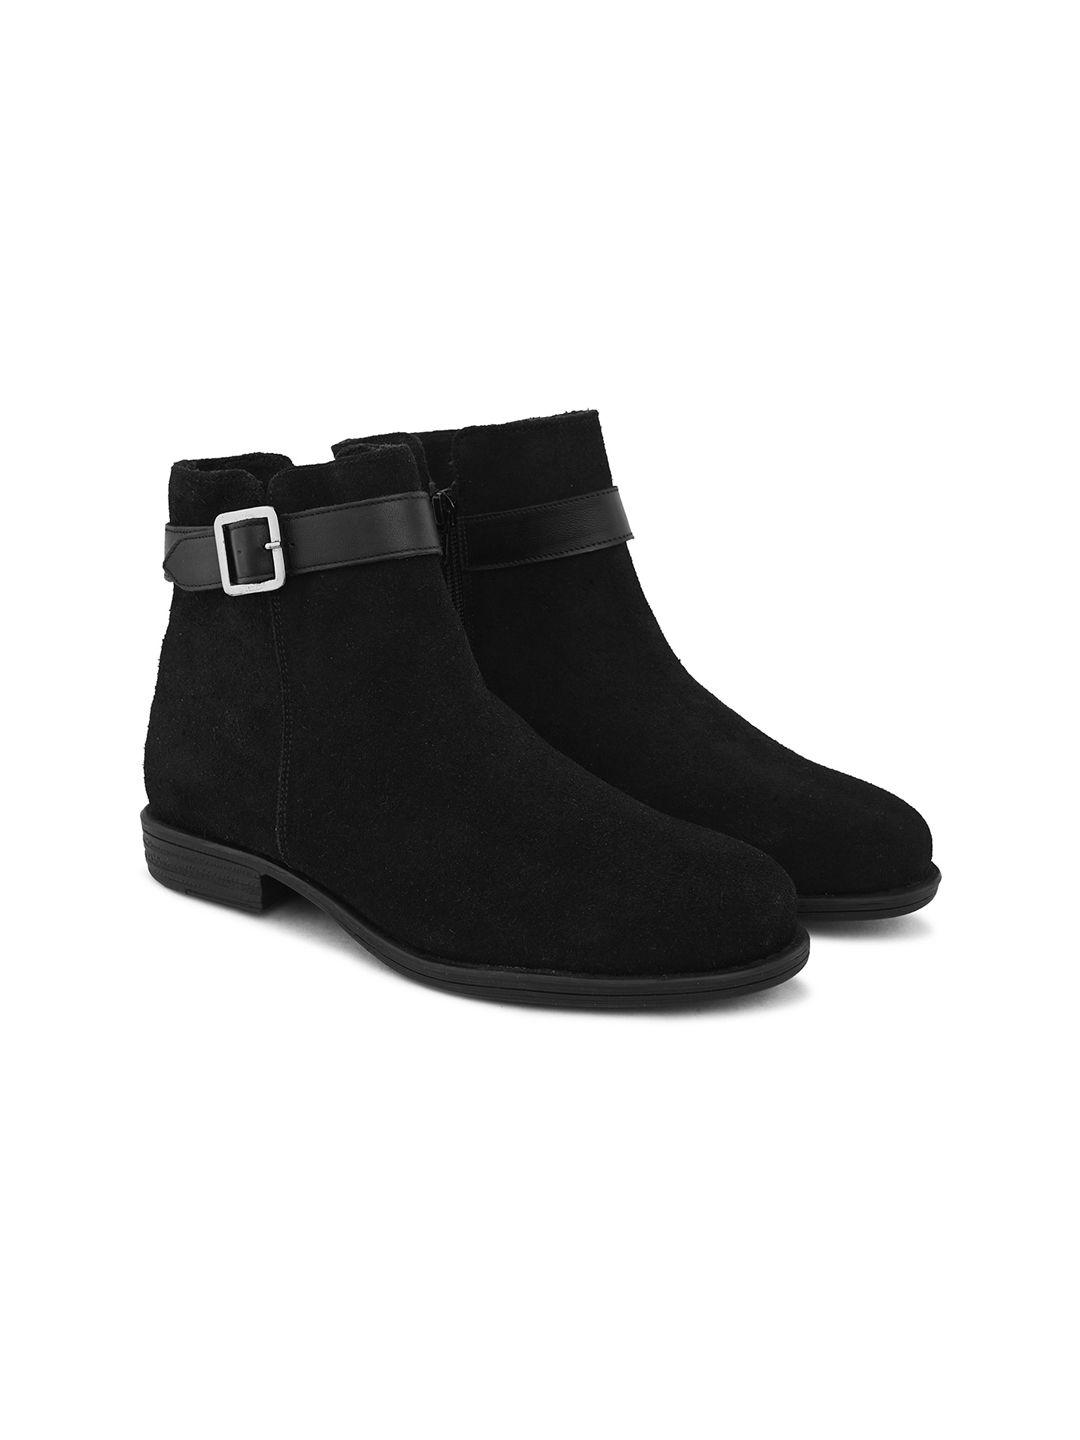 the roadster lifestyle co. women heeled buckle detail mid-top lightweight regular boots